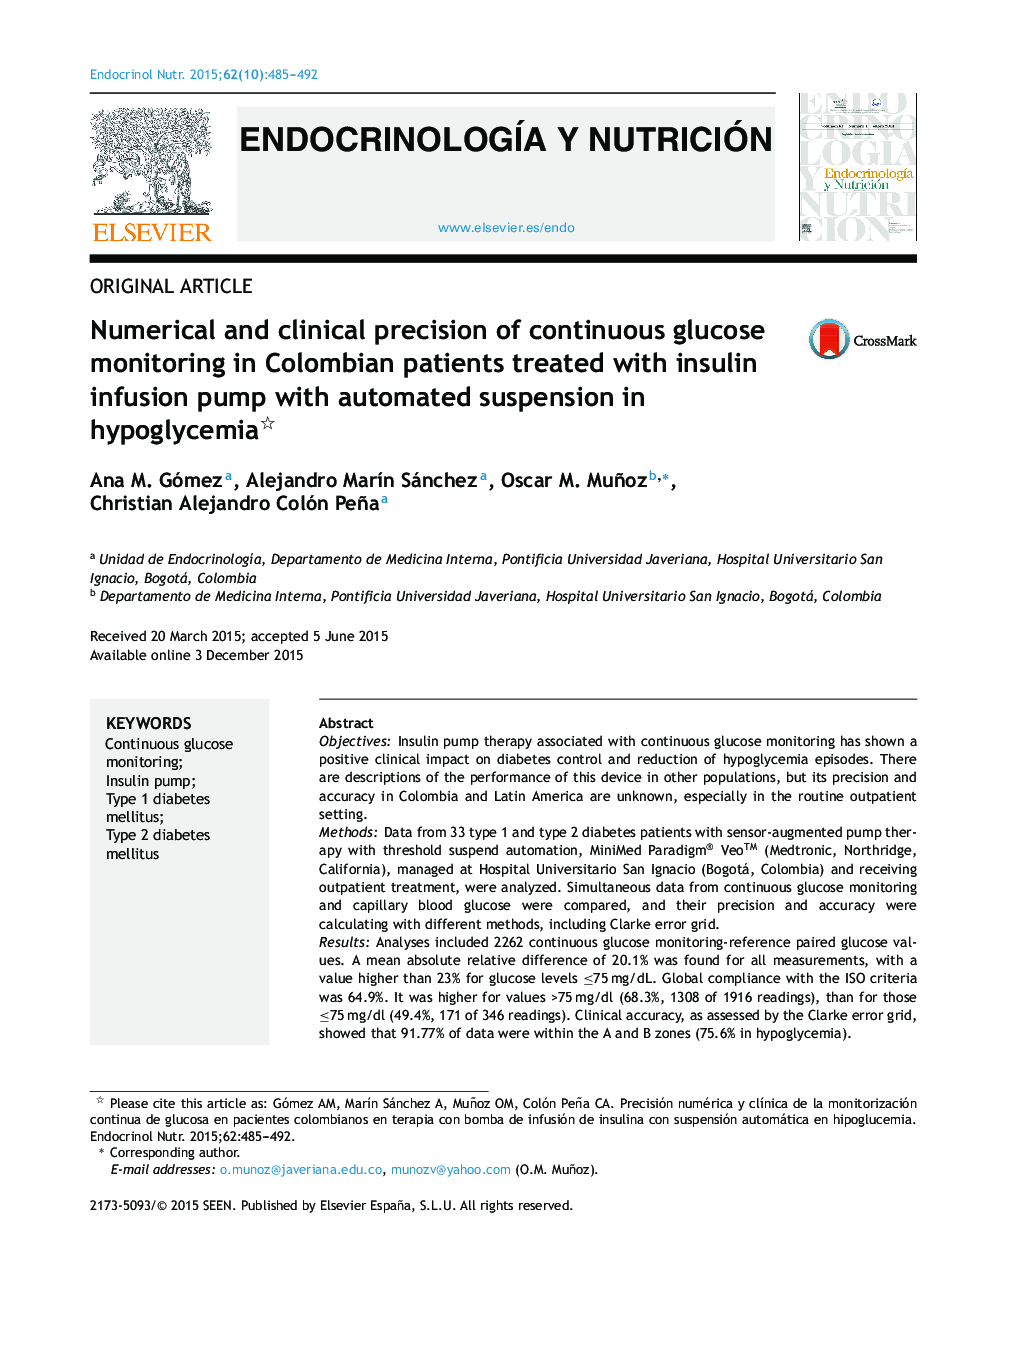 Numerical and clinical precision of continuous glucose monitoring in Colombian patients treated with insulin infusion pump with automated suspension in hypoglycemia